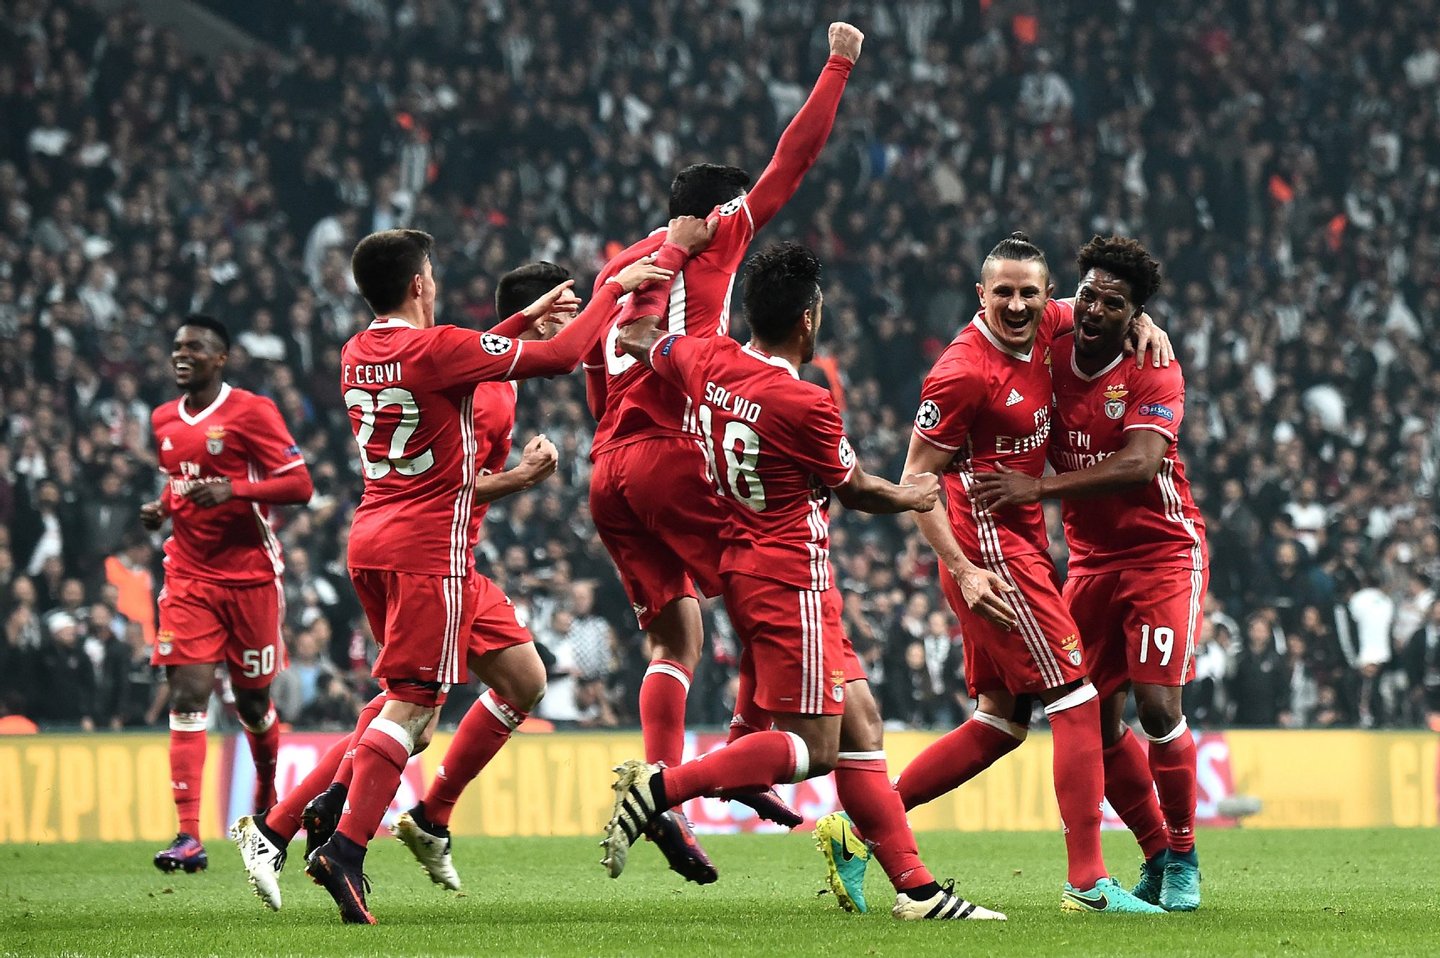 Benfica's Ljubomir Fejsa (2R) celebrates with his teammates after scoring a goal against Besiktas during the UEFA Champions League Group B football match between Besiktas Istanbul and Benfica Lisbon at Vodafone arena on November 23, 2016 in Istanbul . / AFP / OZAN KOSE (Photo credit should read OZAN KOSE/AFP/Getty Images)